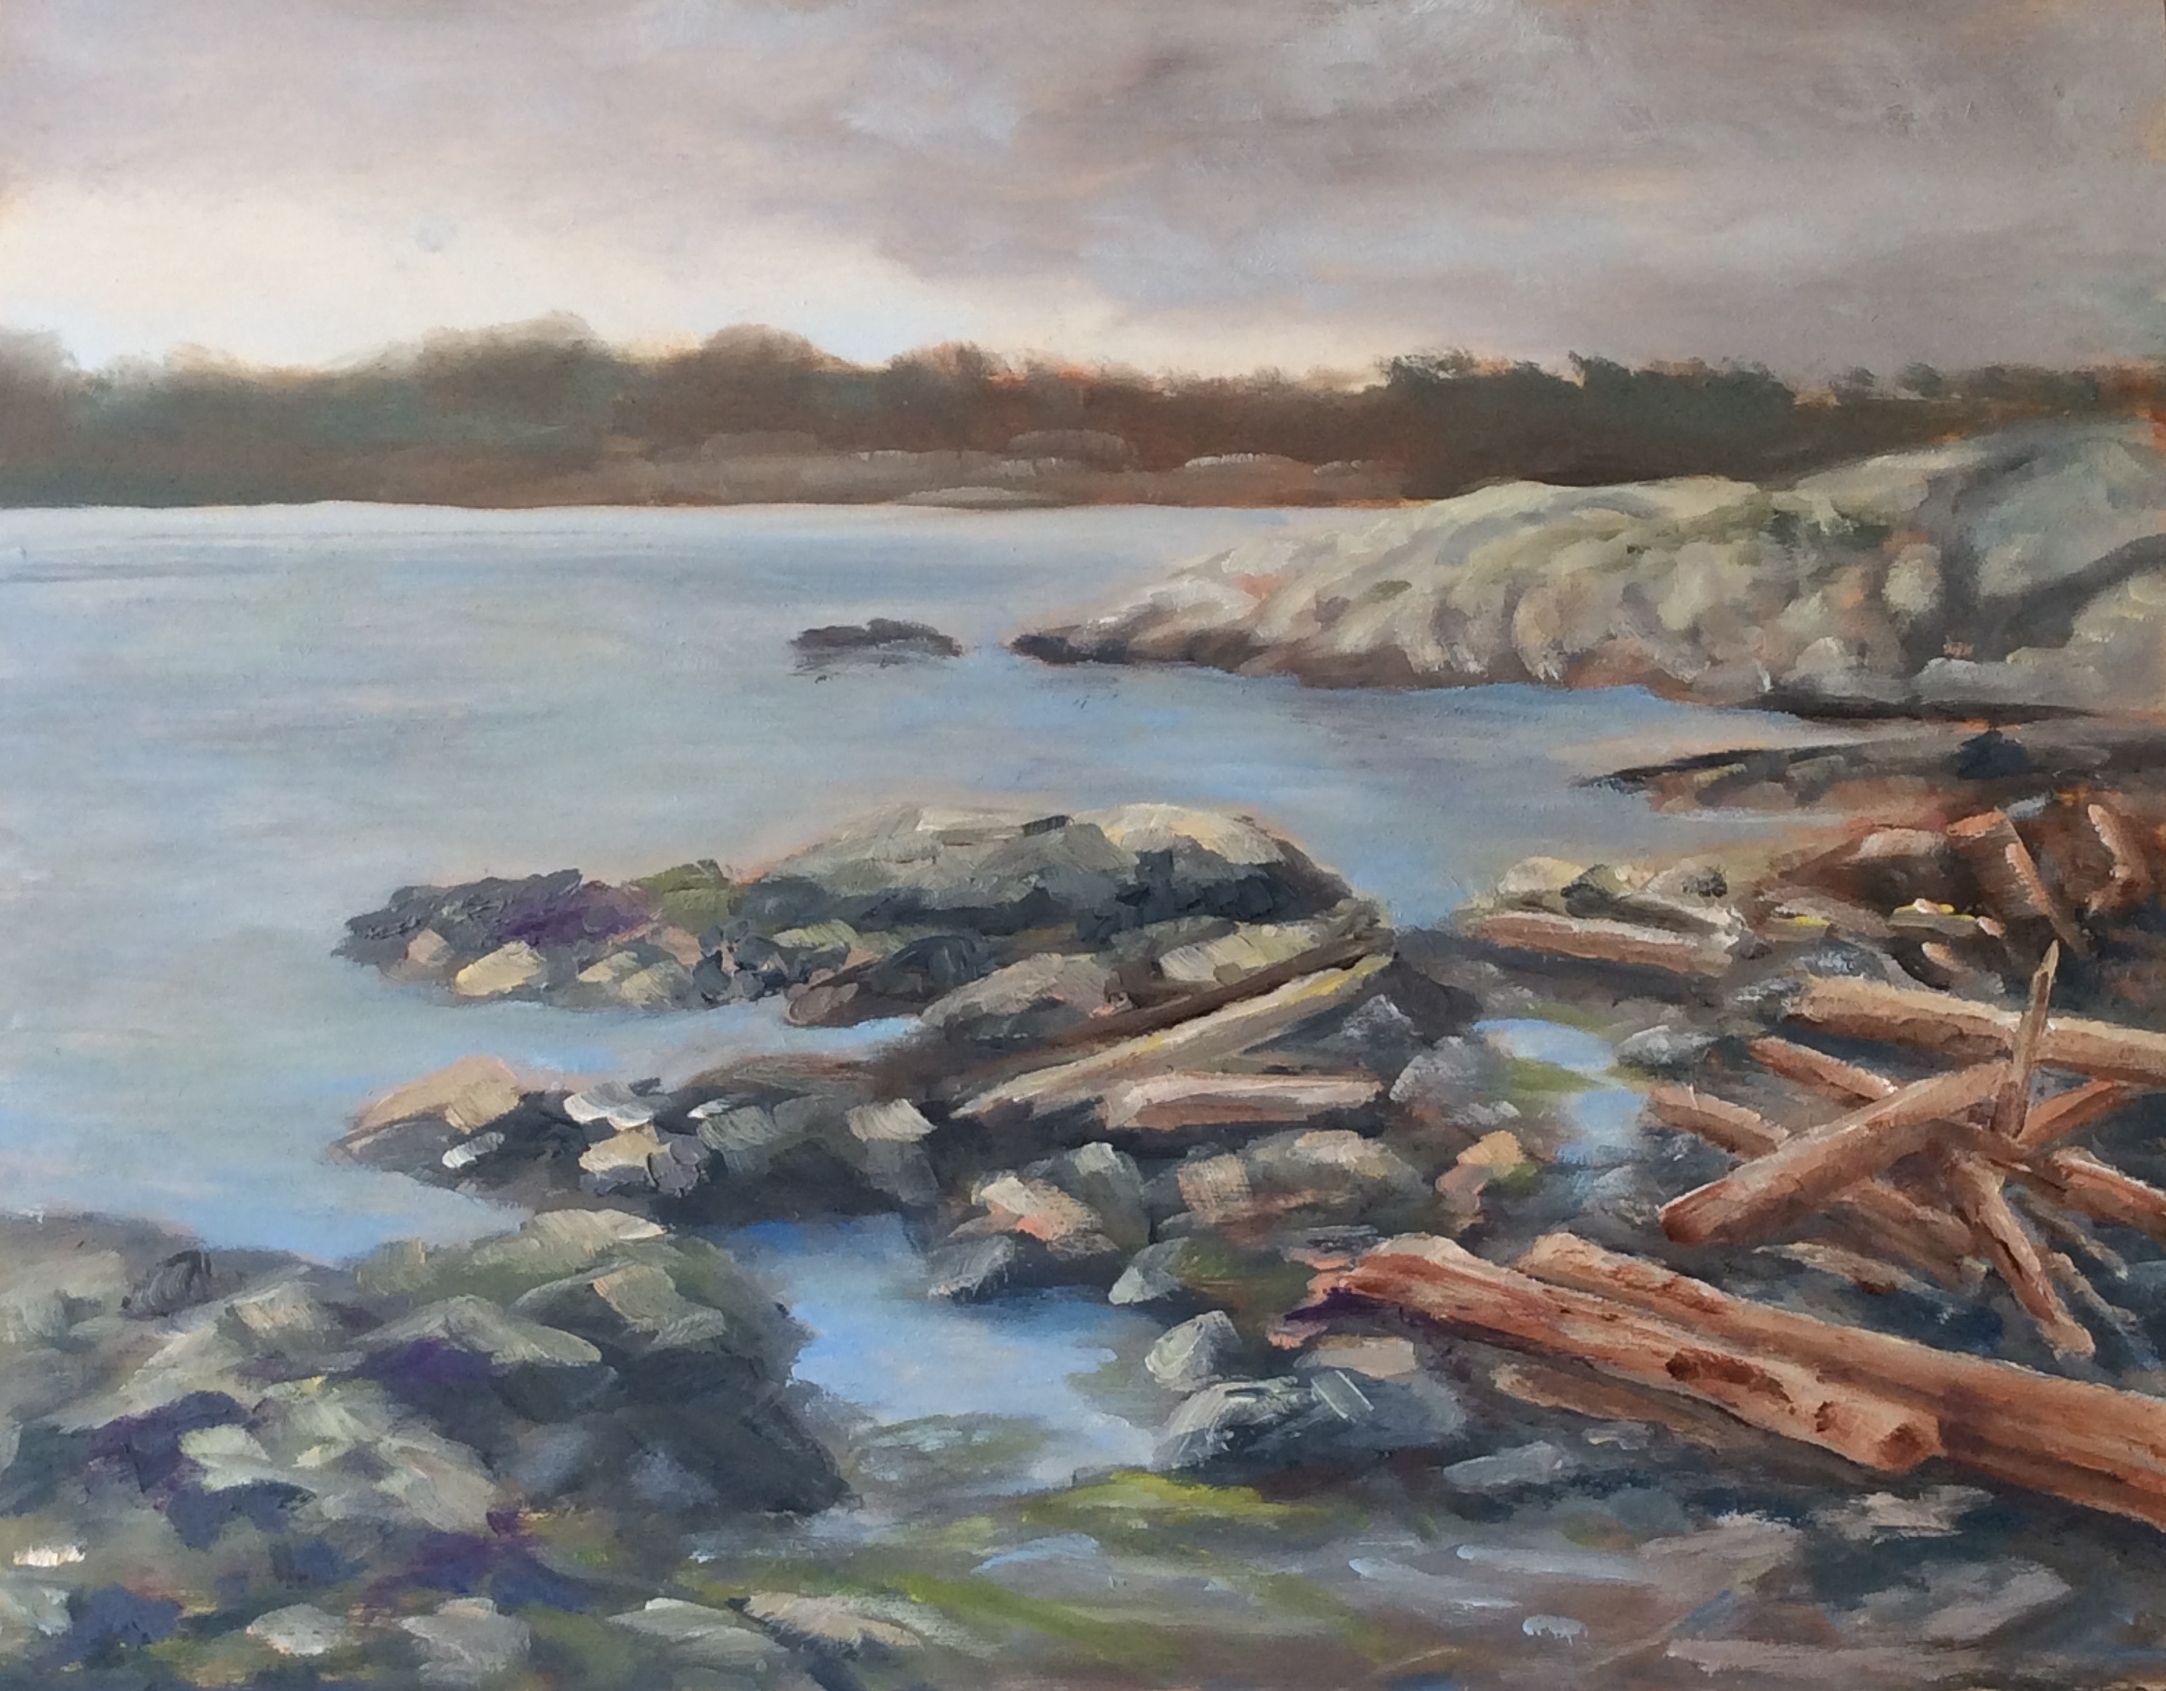   Cattle Point   Oil 11 x 14 